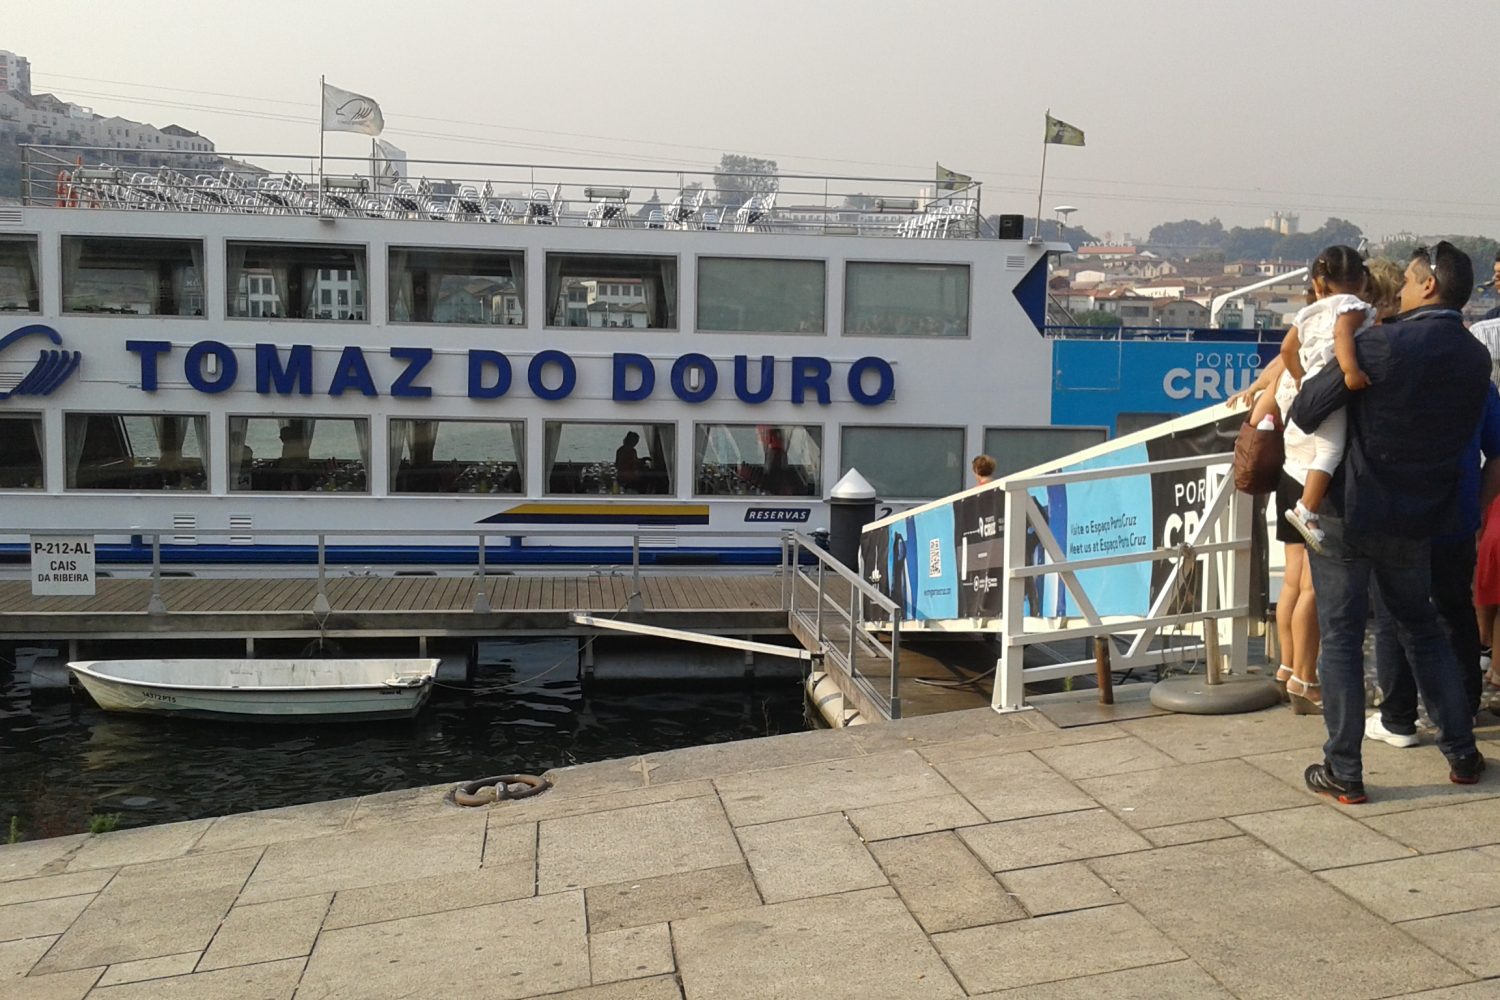 People taking place on the boat for a douro cruise - Cópia - Cópia